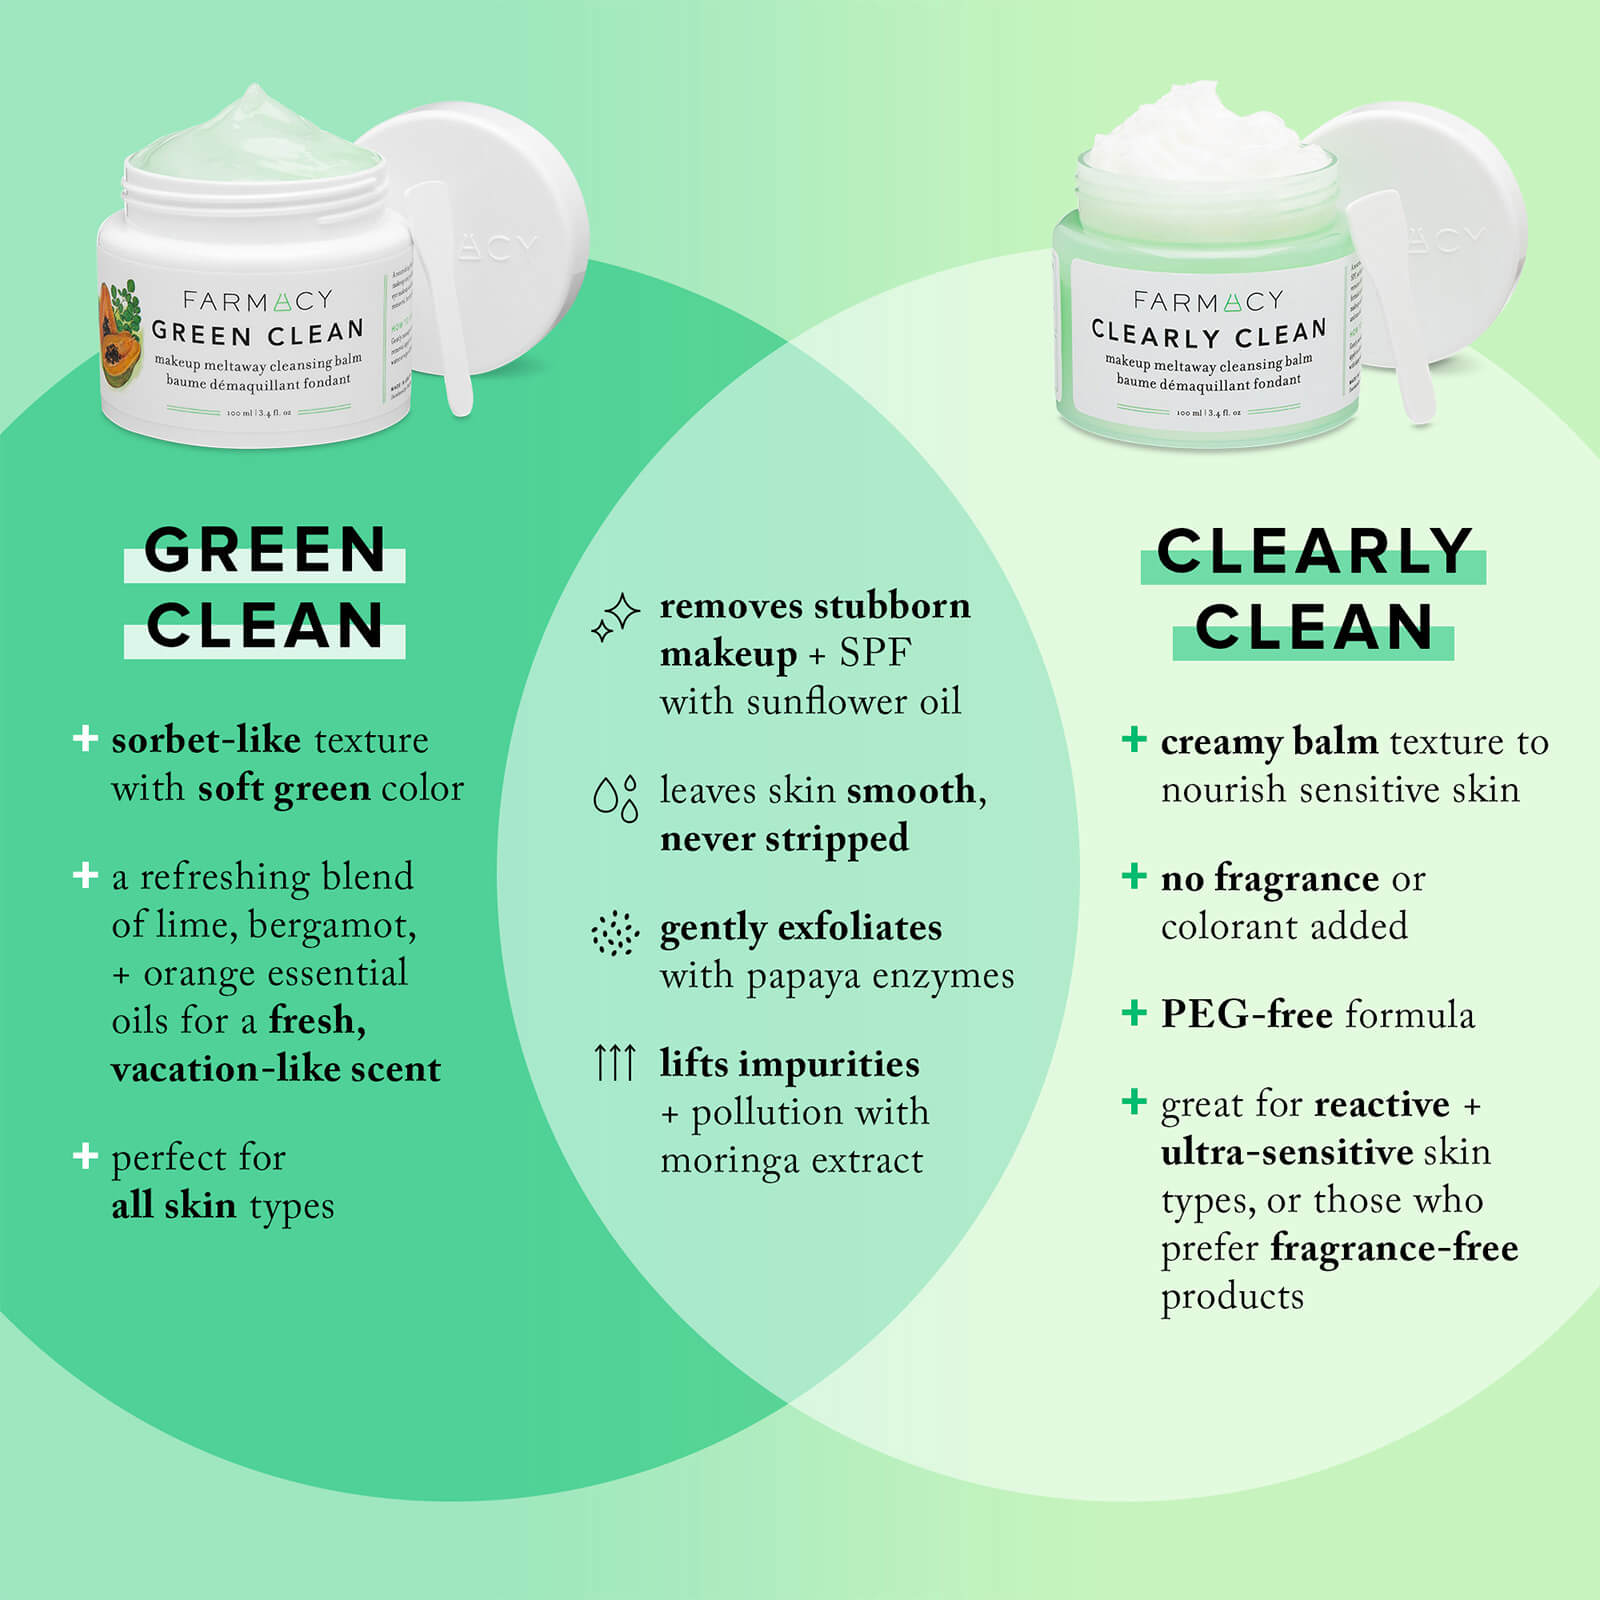 Green Clean benefits vs Clearly Clean benefits